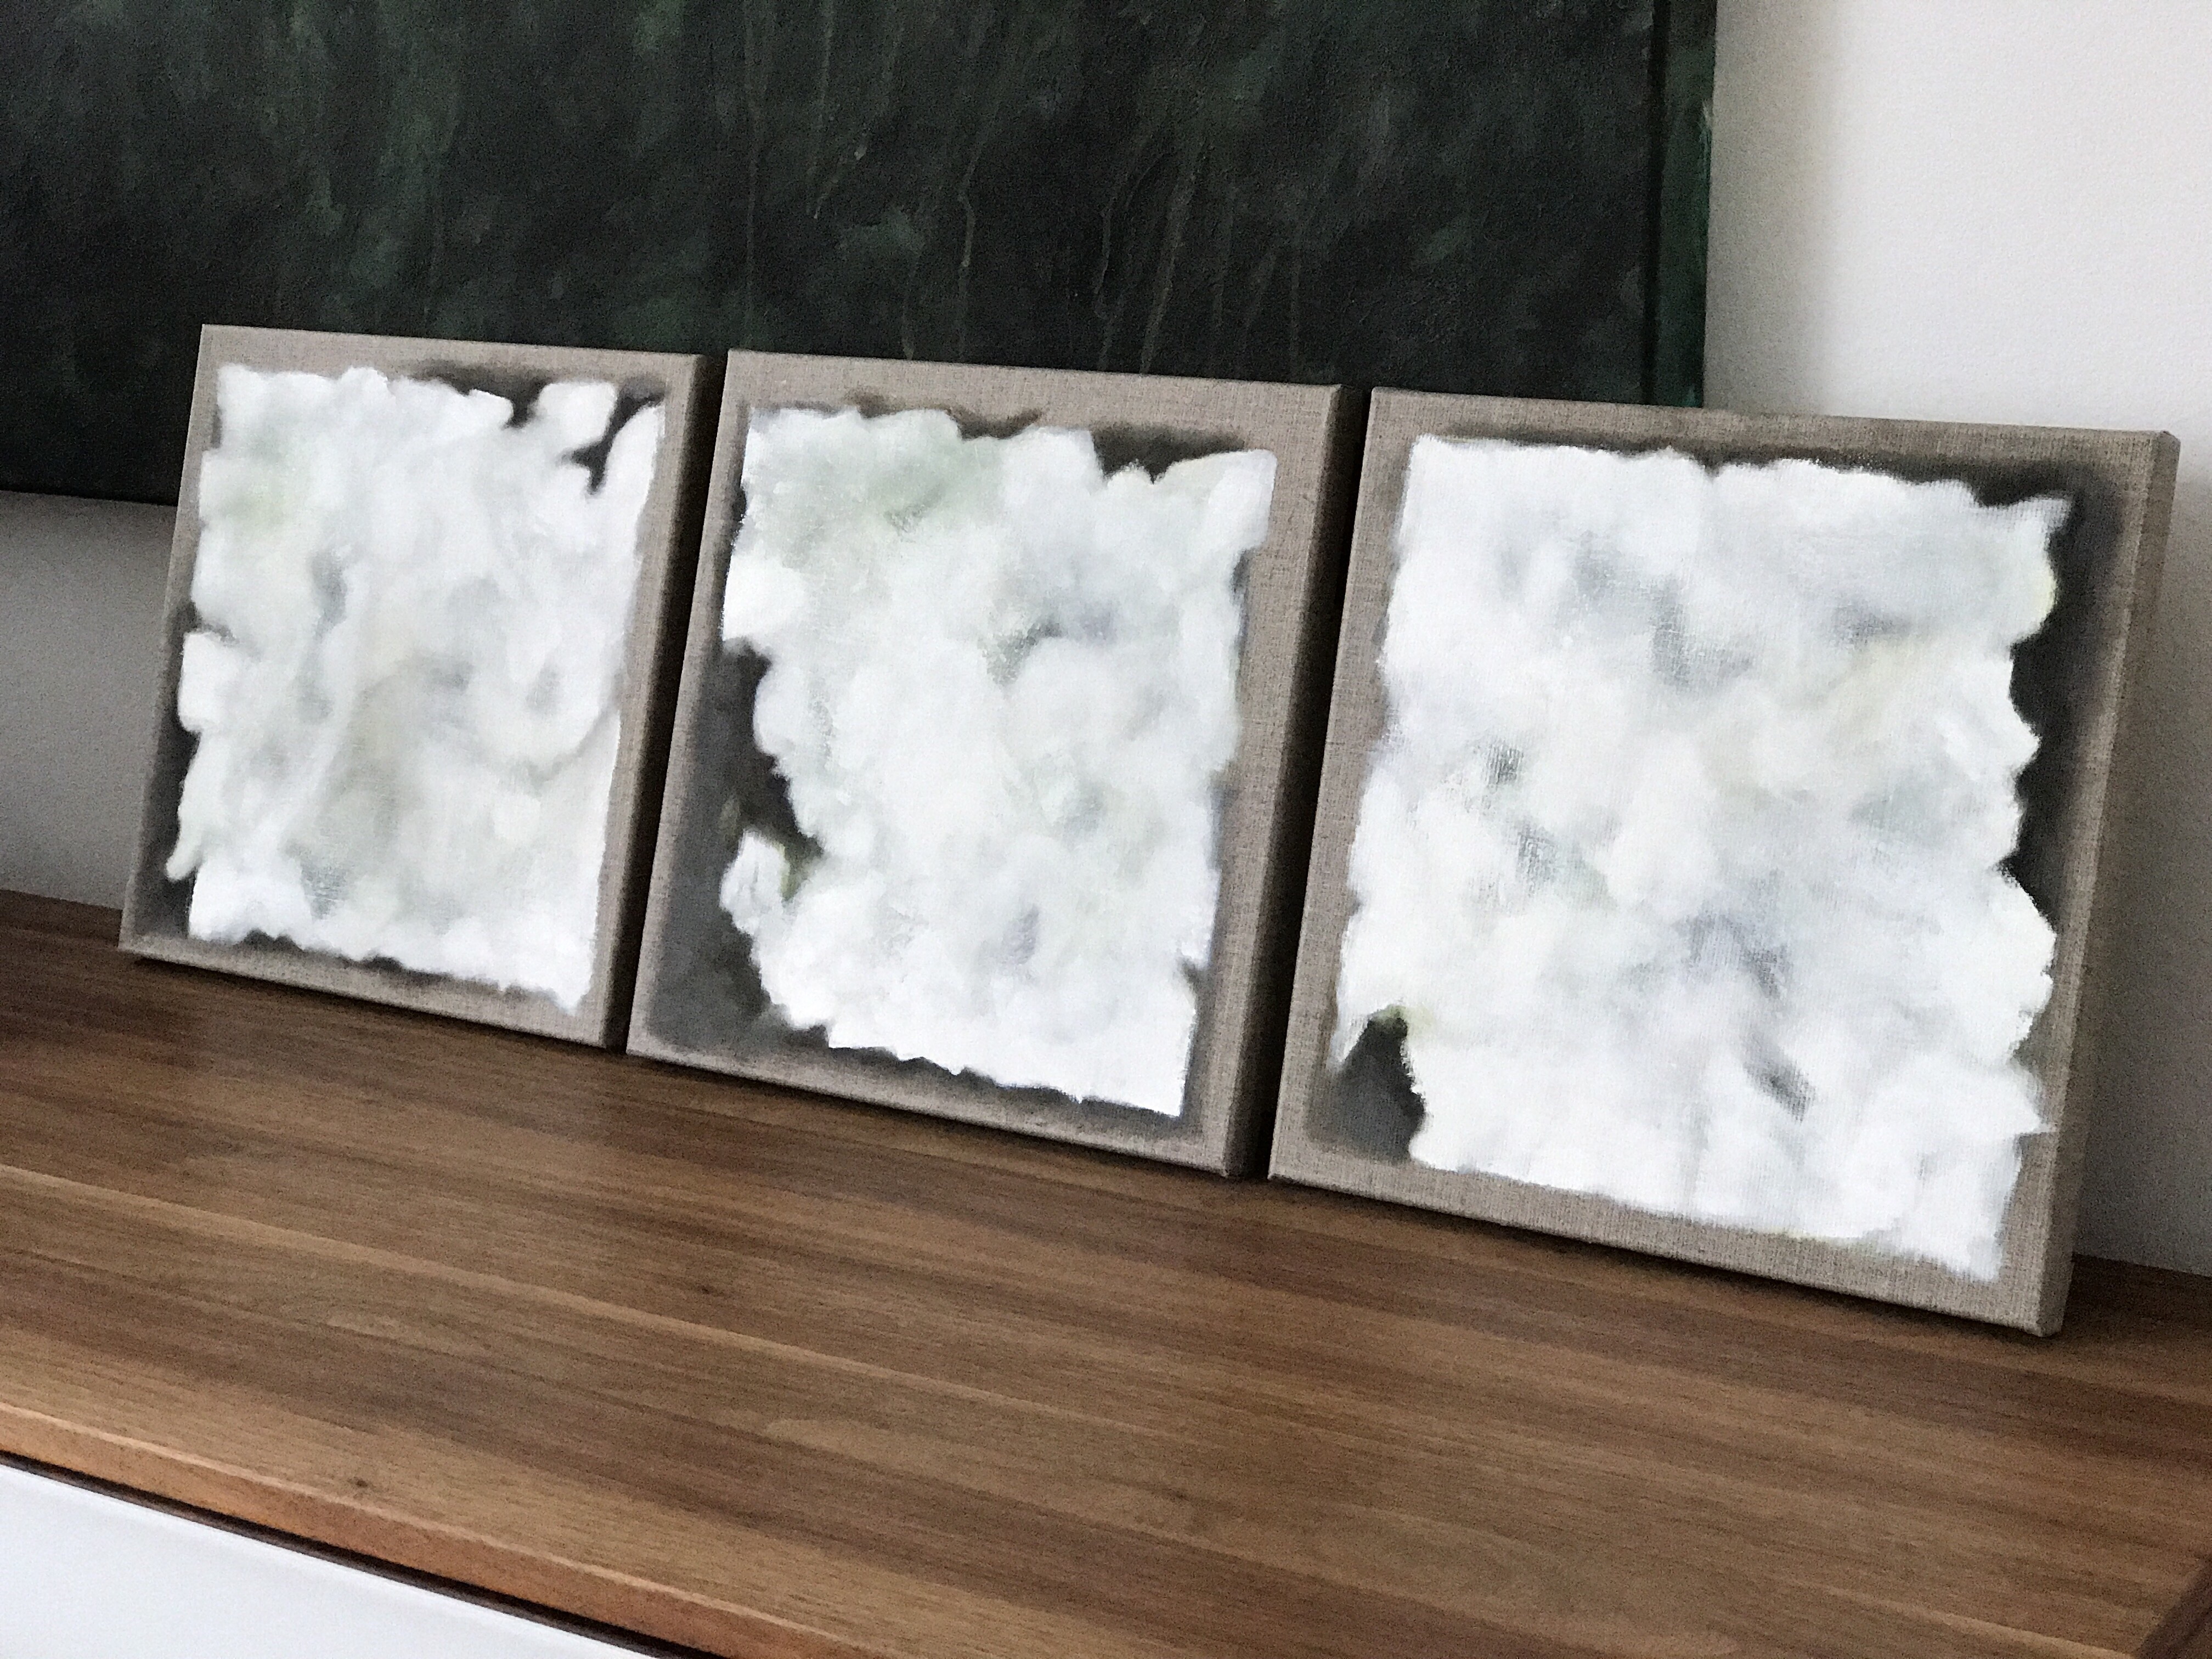 series of 3 paintings, monochrome white